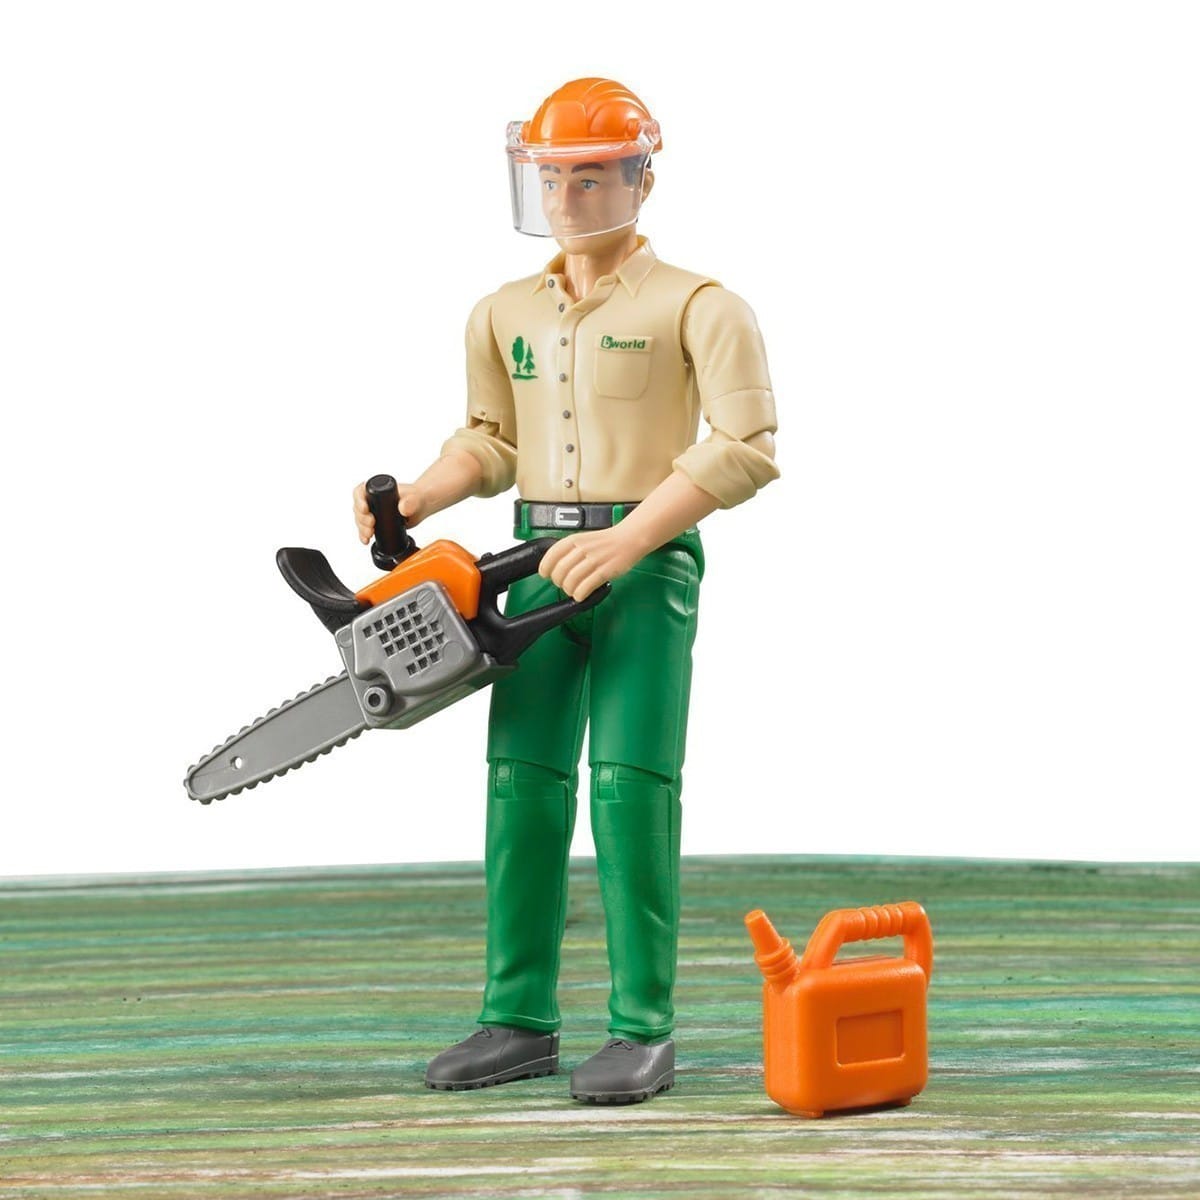 Bruder - Bworld Male Figure - Forestry Worker with Accessories